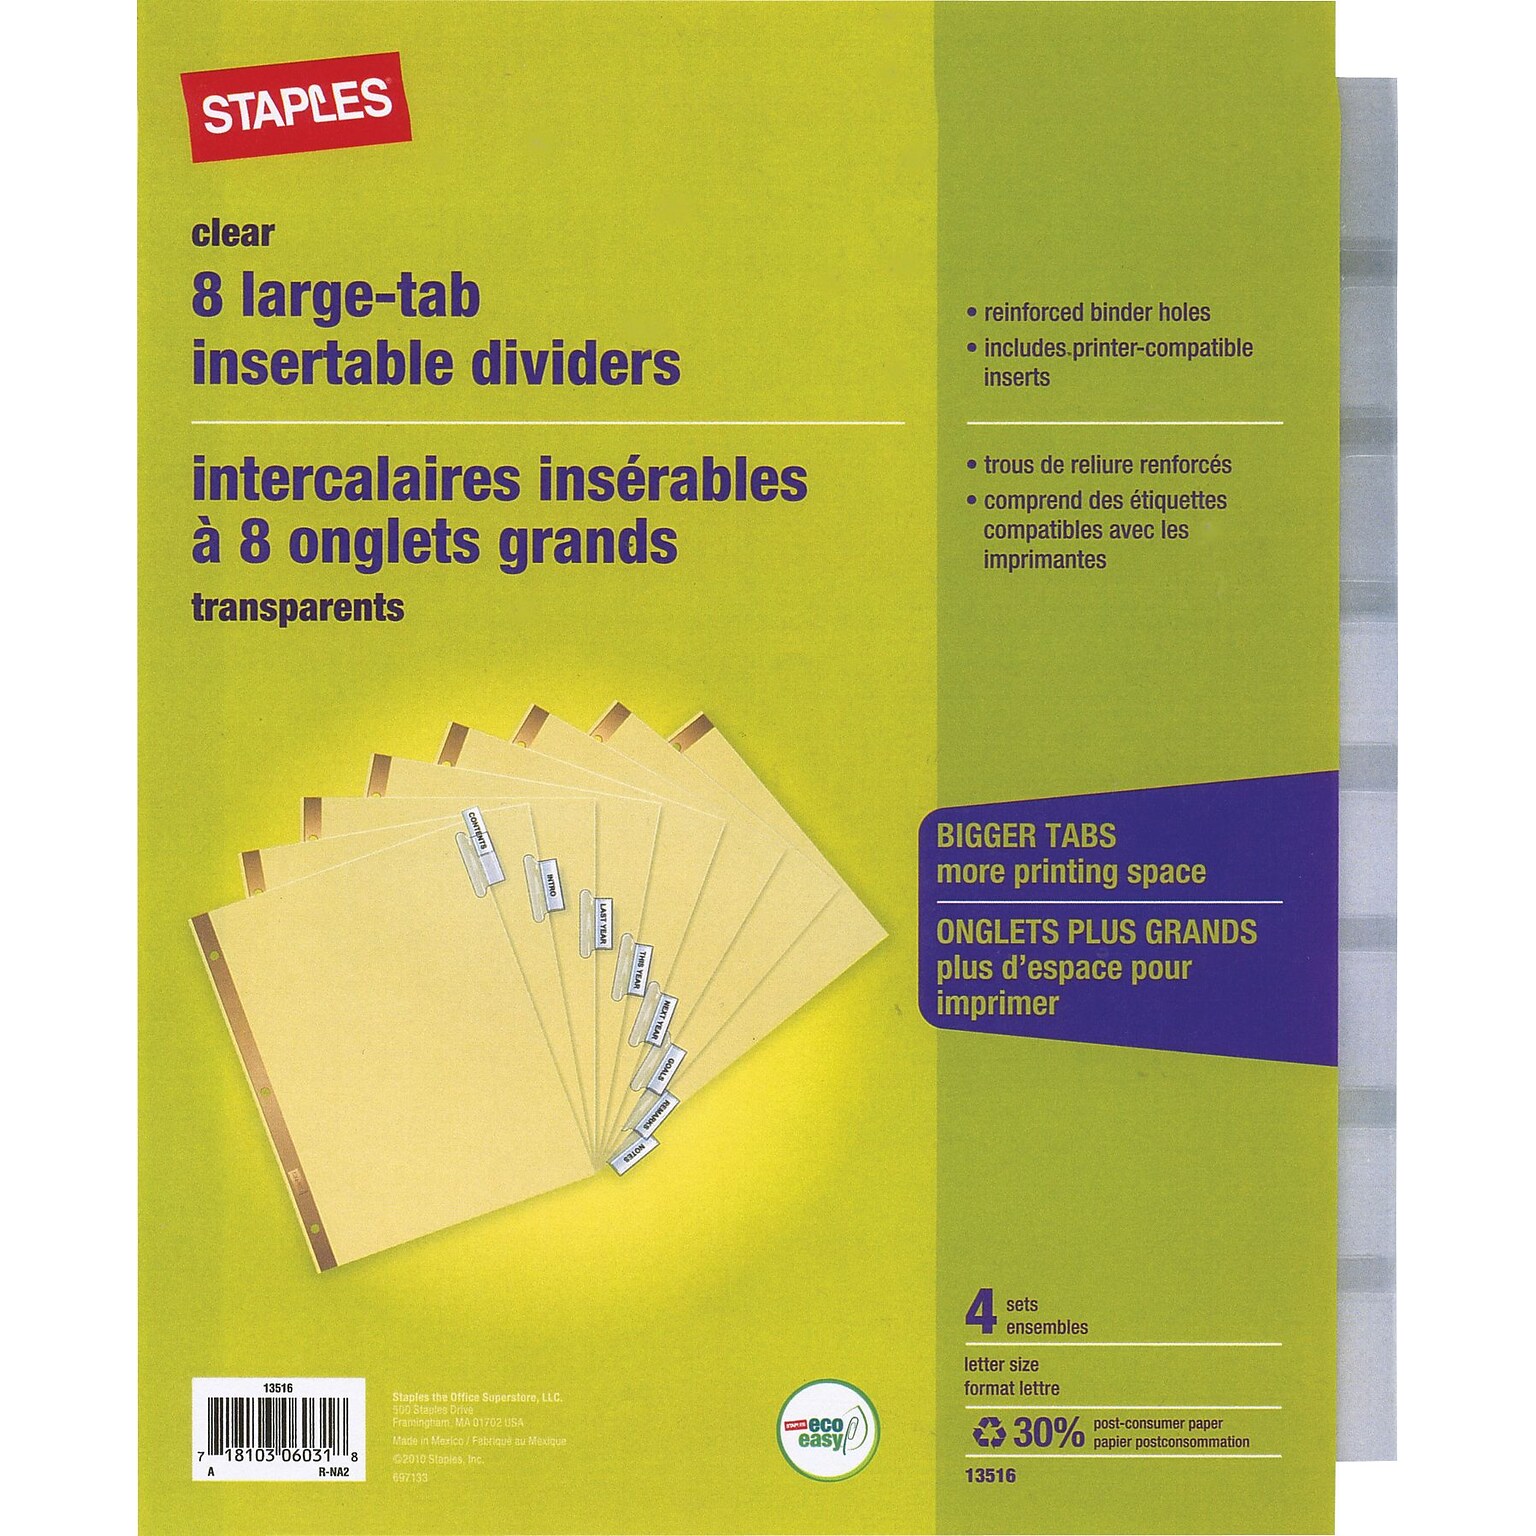 Staples Big Tab Insertable Dividers, 8-Tab, Clear, 4/Pack (13516)